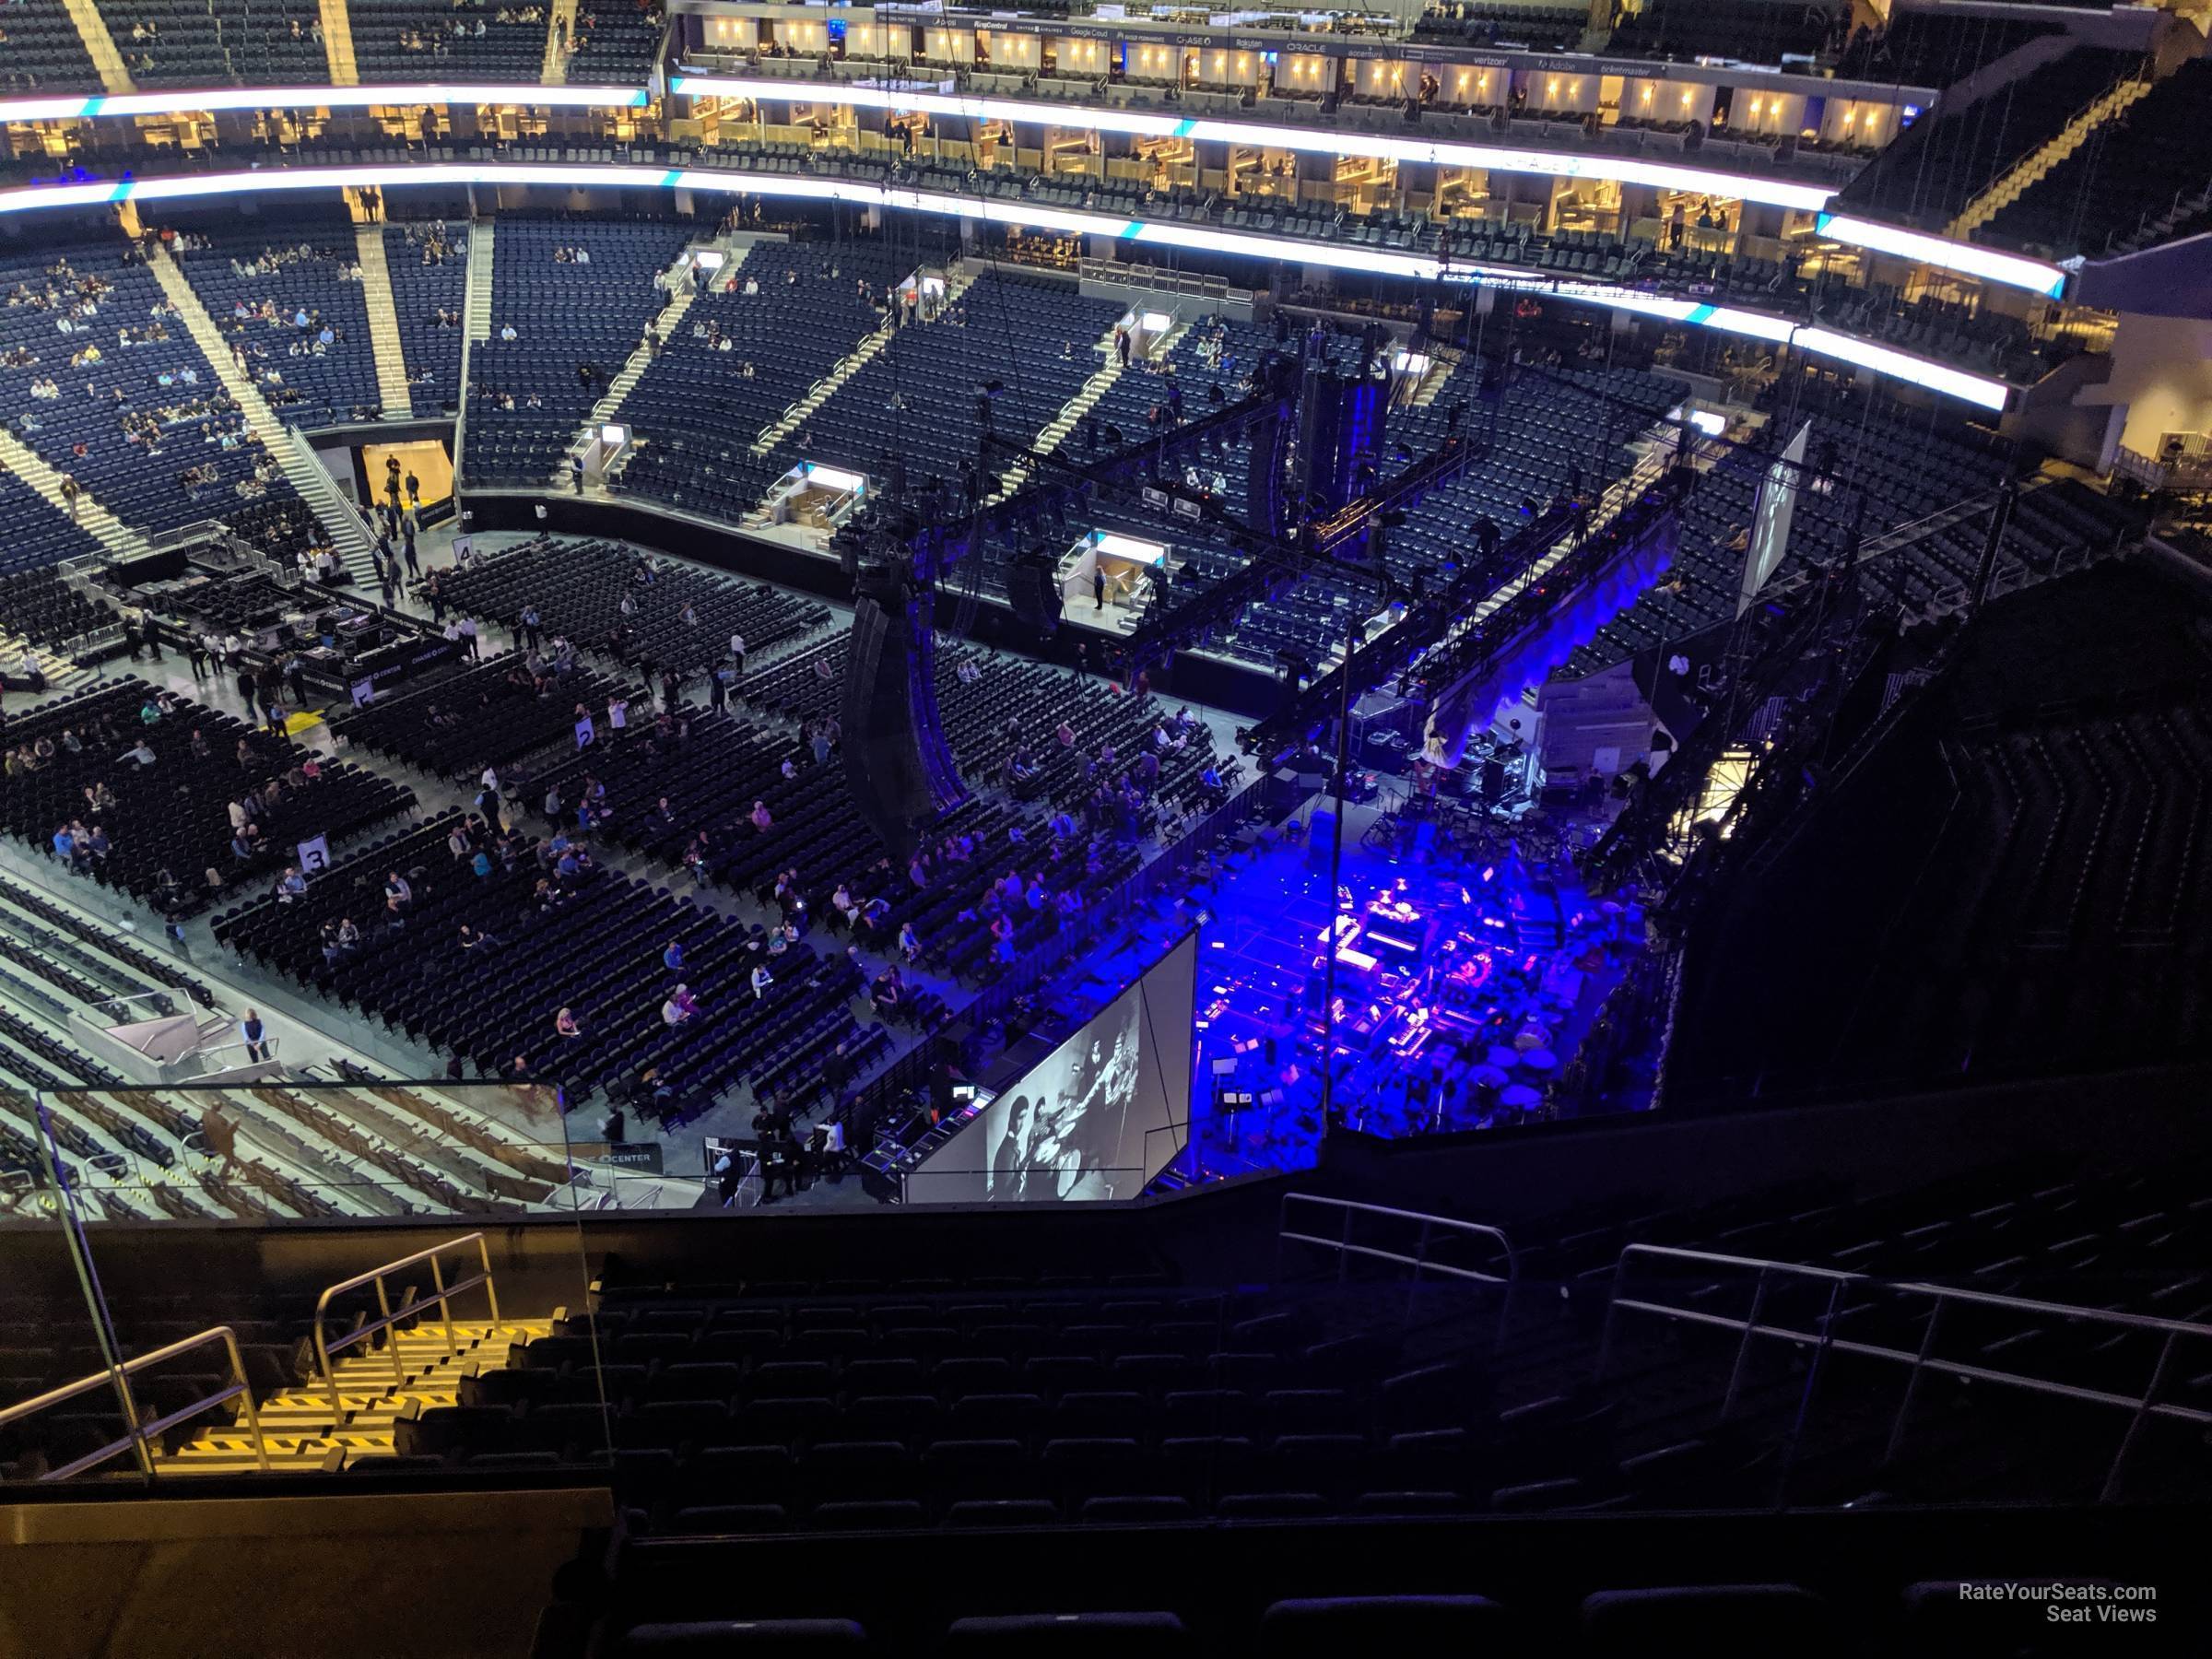 section 202, row 13 seat view  for concert - chase center